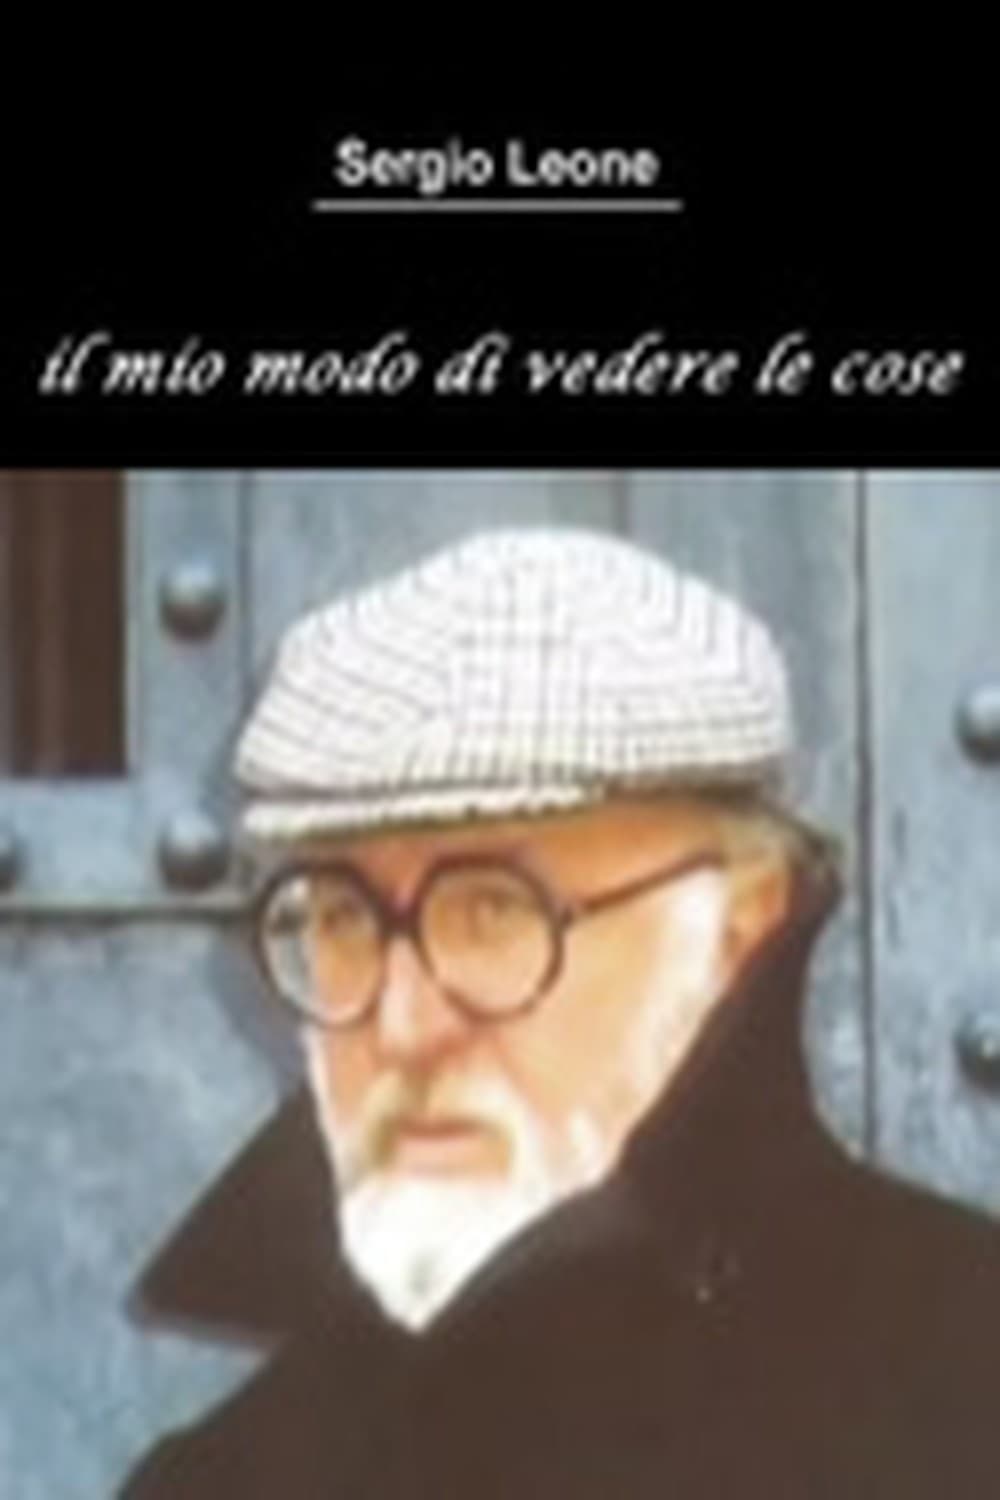 Sergio Leone: The Way I See Things